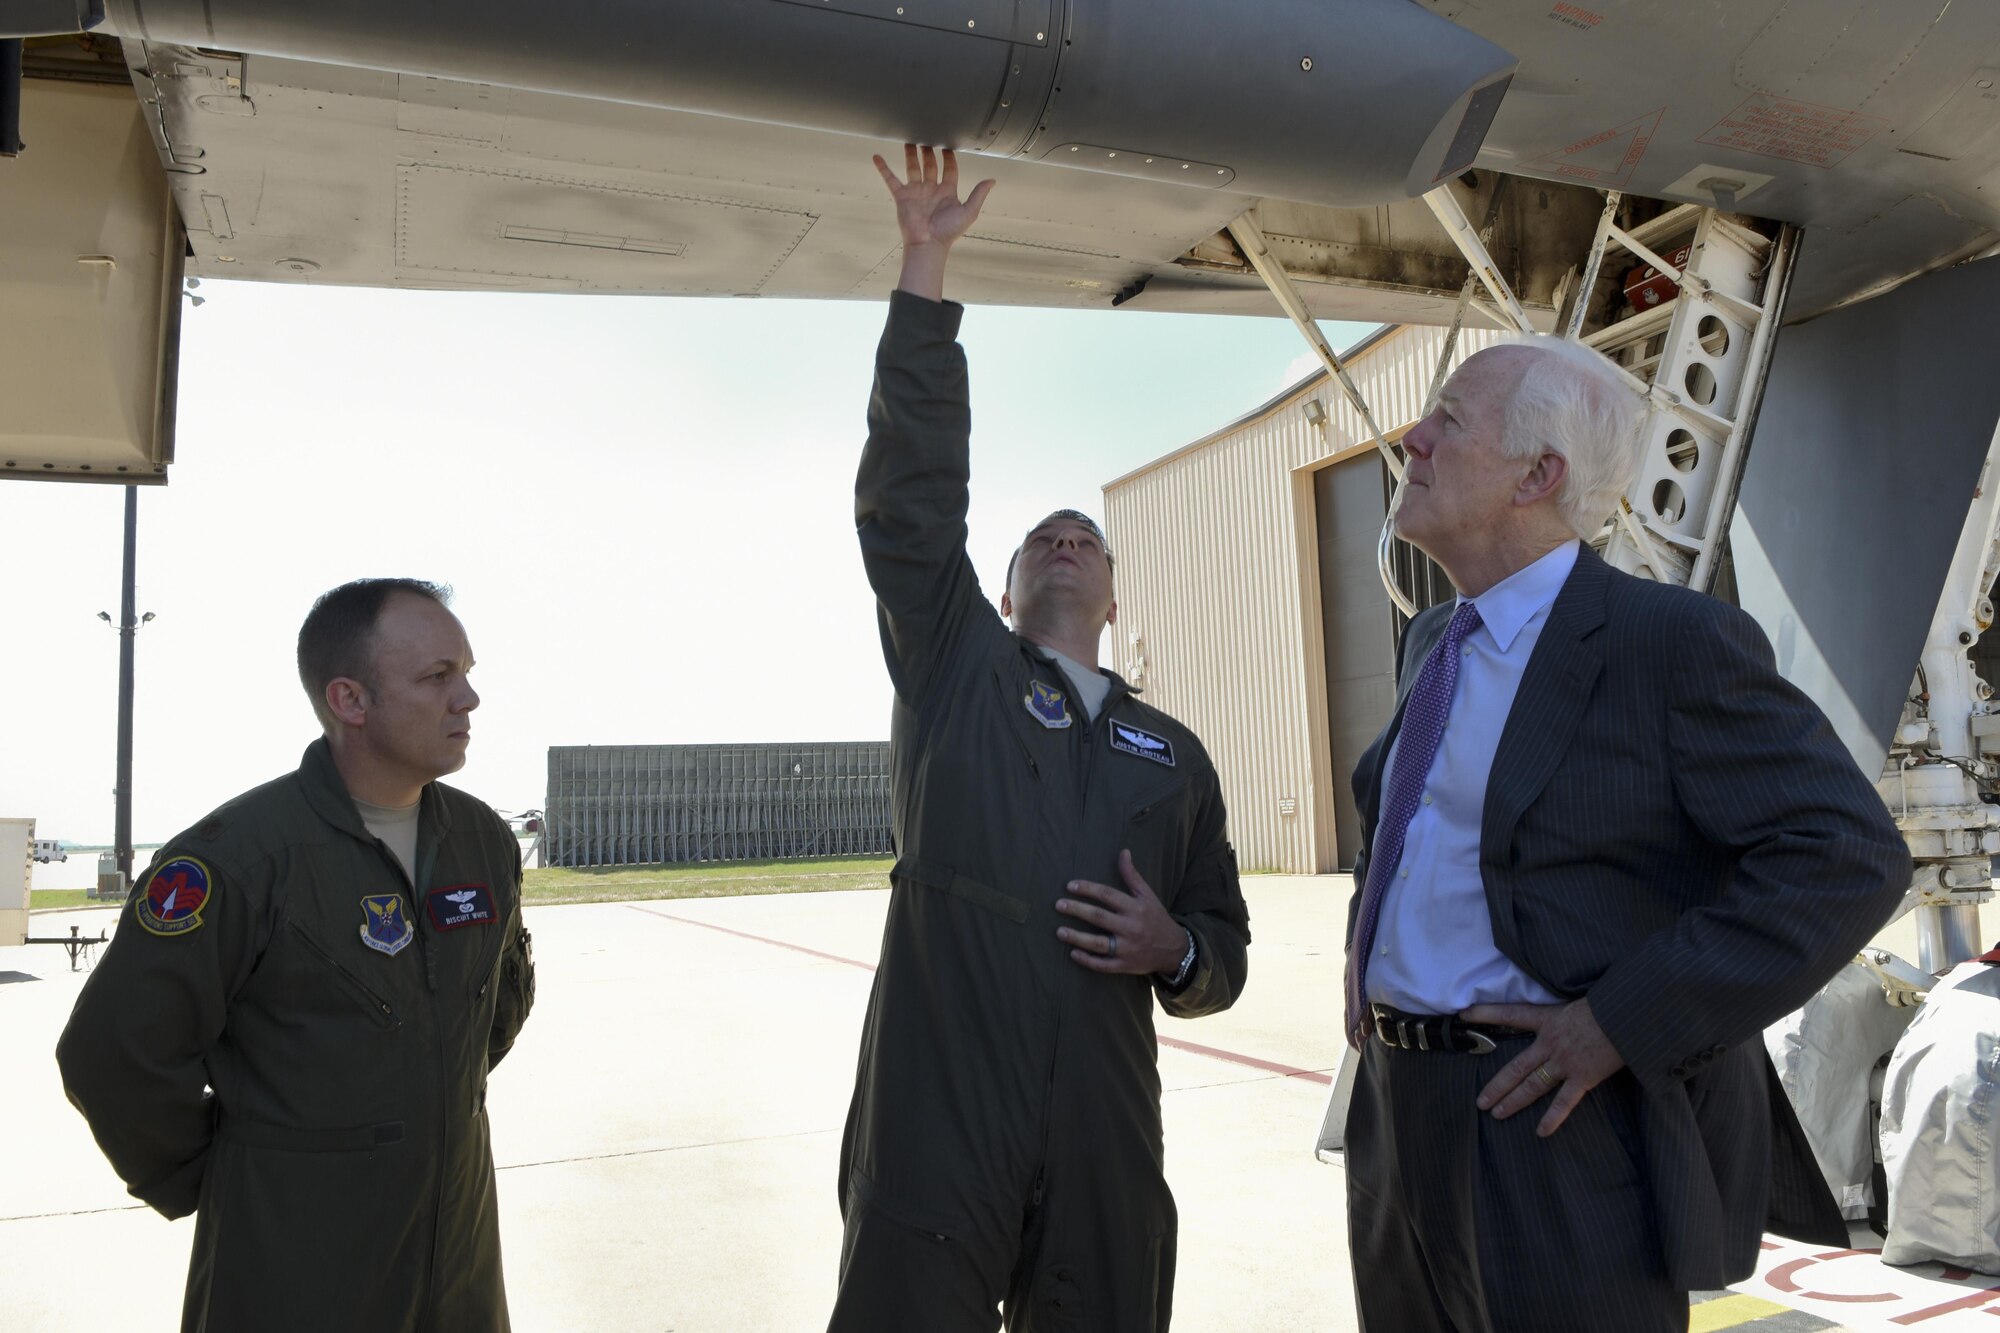 U.S. Air Force Maj. Justin Croteau, 9th Bomb Squadron chief of mobility, and Maj. Thomas White, 7th Operations Support Squadron assistant director of operations, explain the function of the B-1B Lancer navigation module to Sen. John Cornyn, R-TX, at Dyess Air Force Base, Texas, April 18, 2017. The senator was able to get an up-close look at the bomber and learn about its mission. (U.S. Air Force photo by Senior Airman Kedesha Pennant)